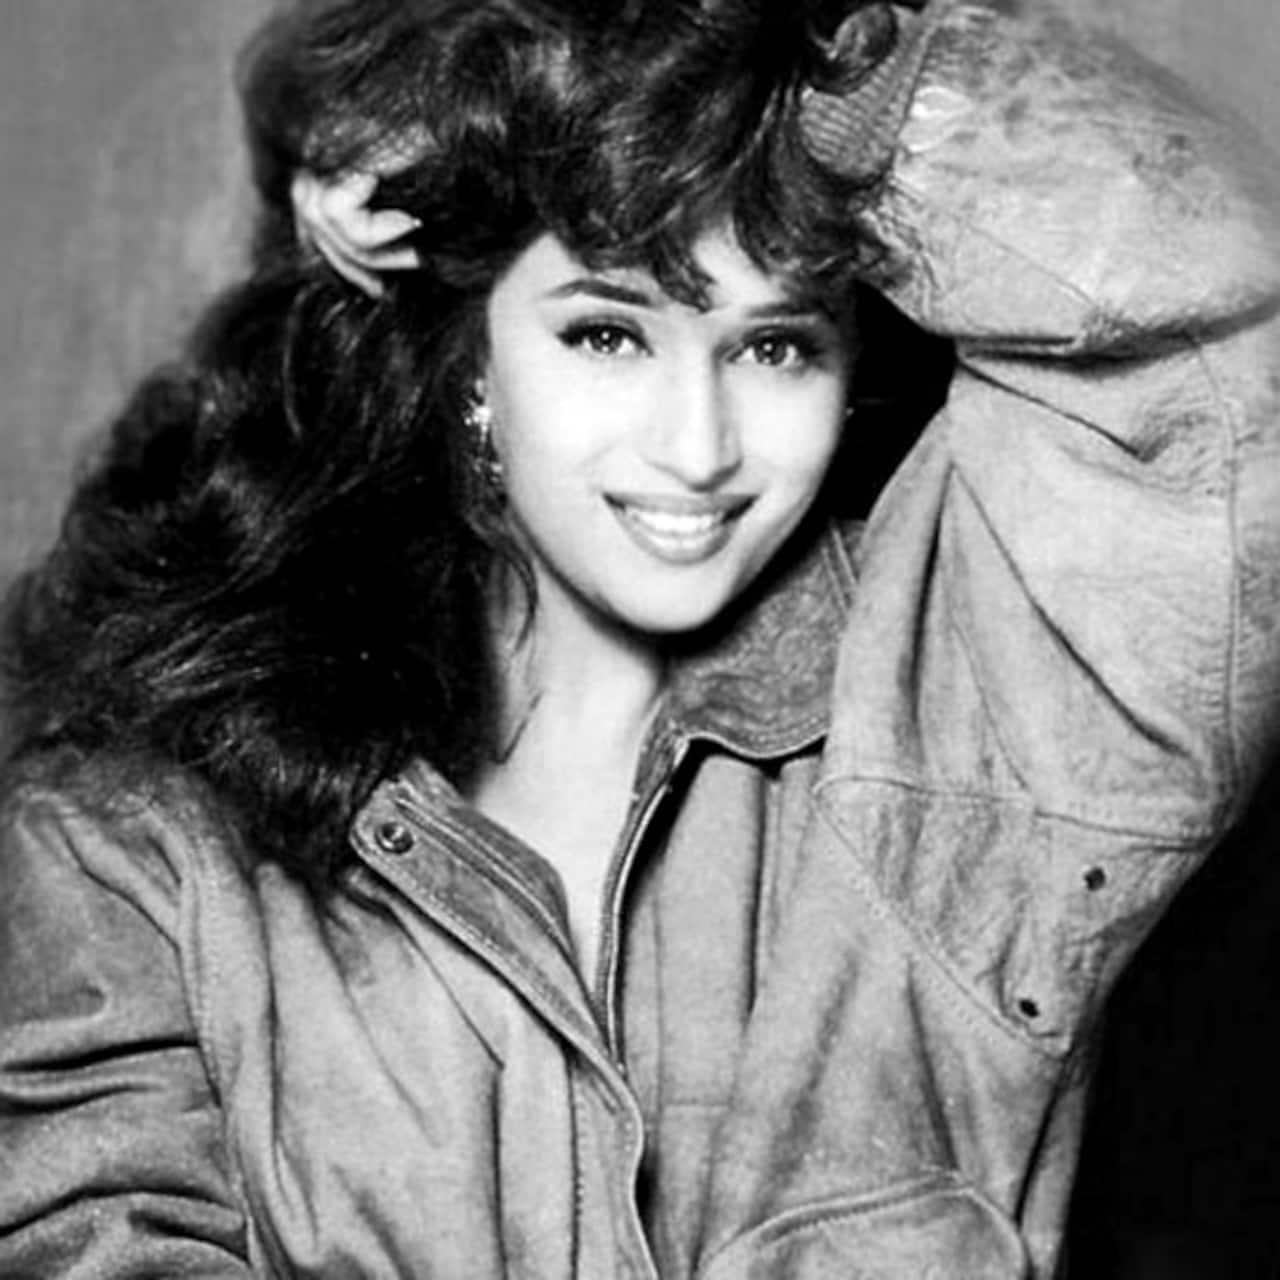 Madhuri Dixit flaunts her hair in a sensuous way for a photoshoot